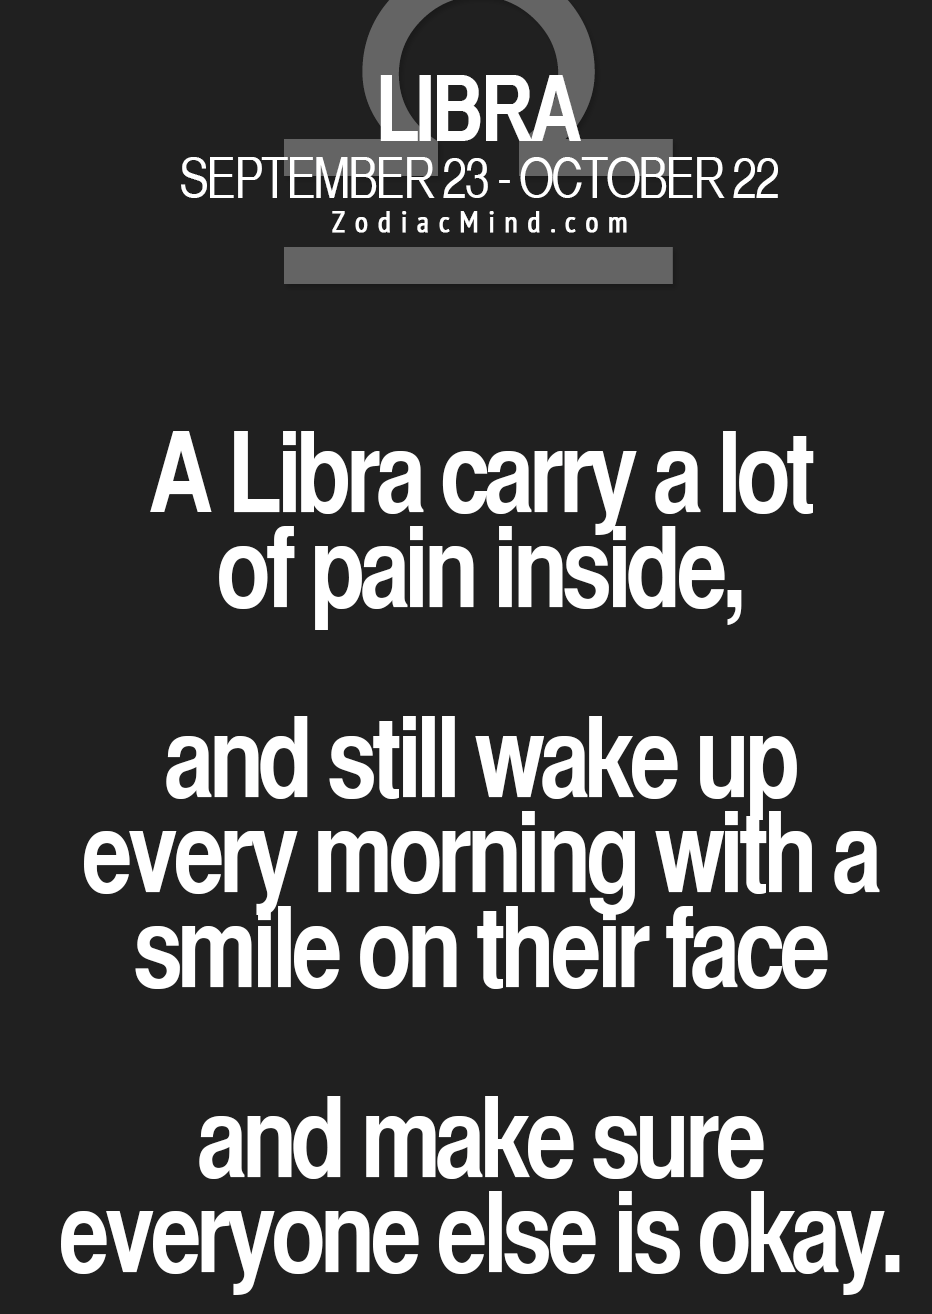 ♎ A Libra carry a lot of pain inside, and still wake up every